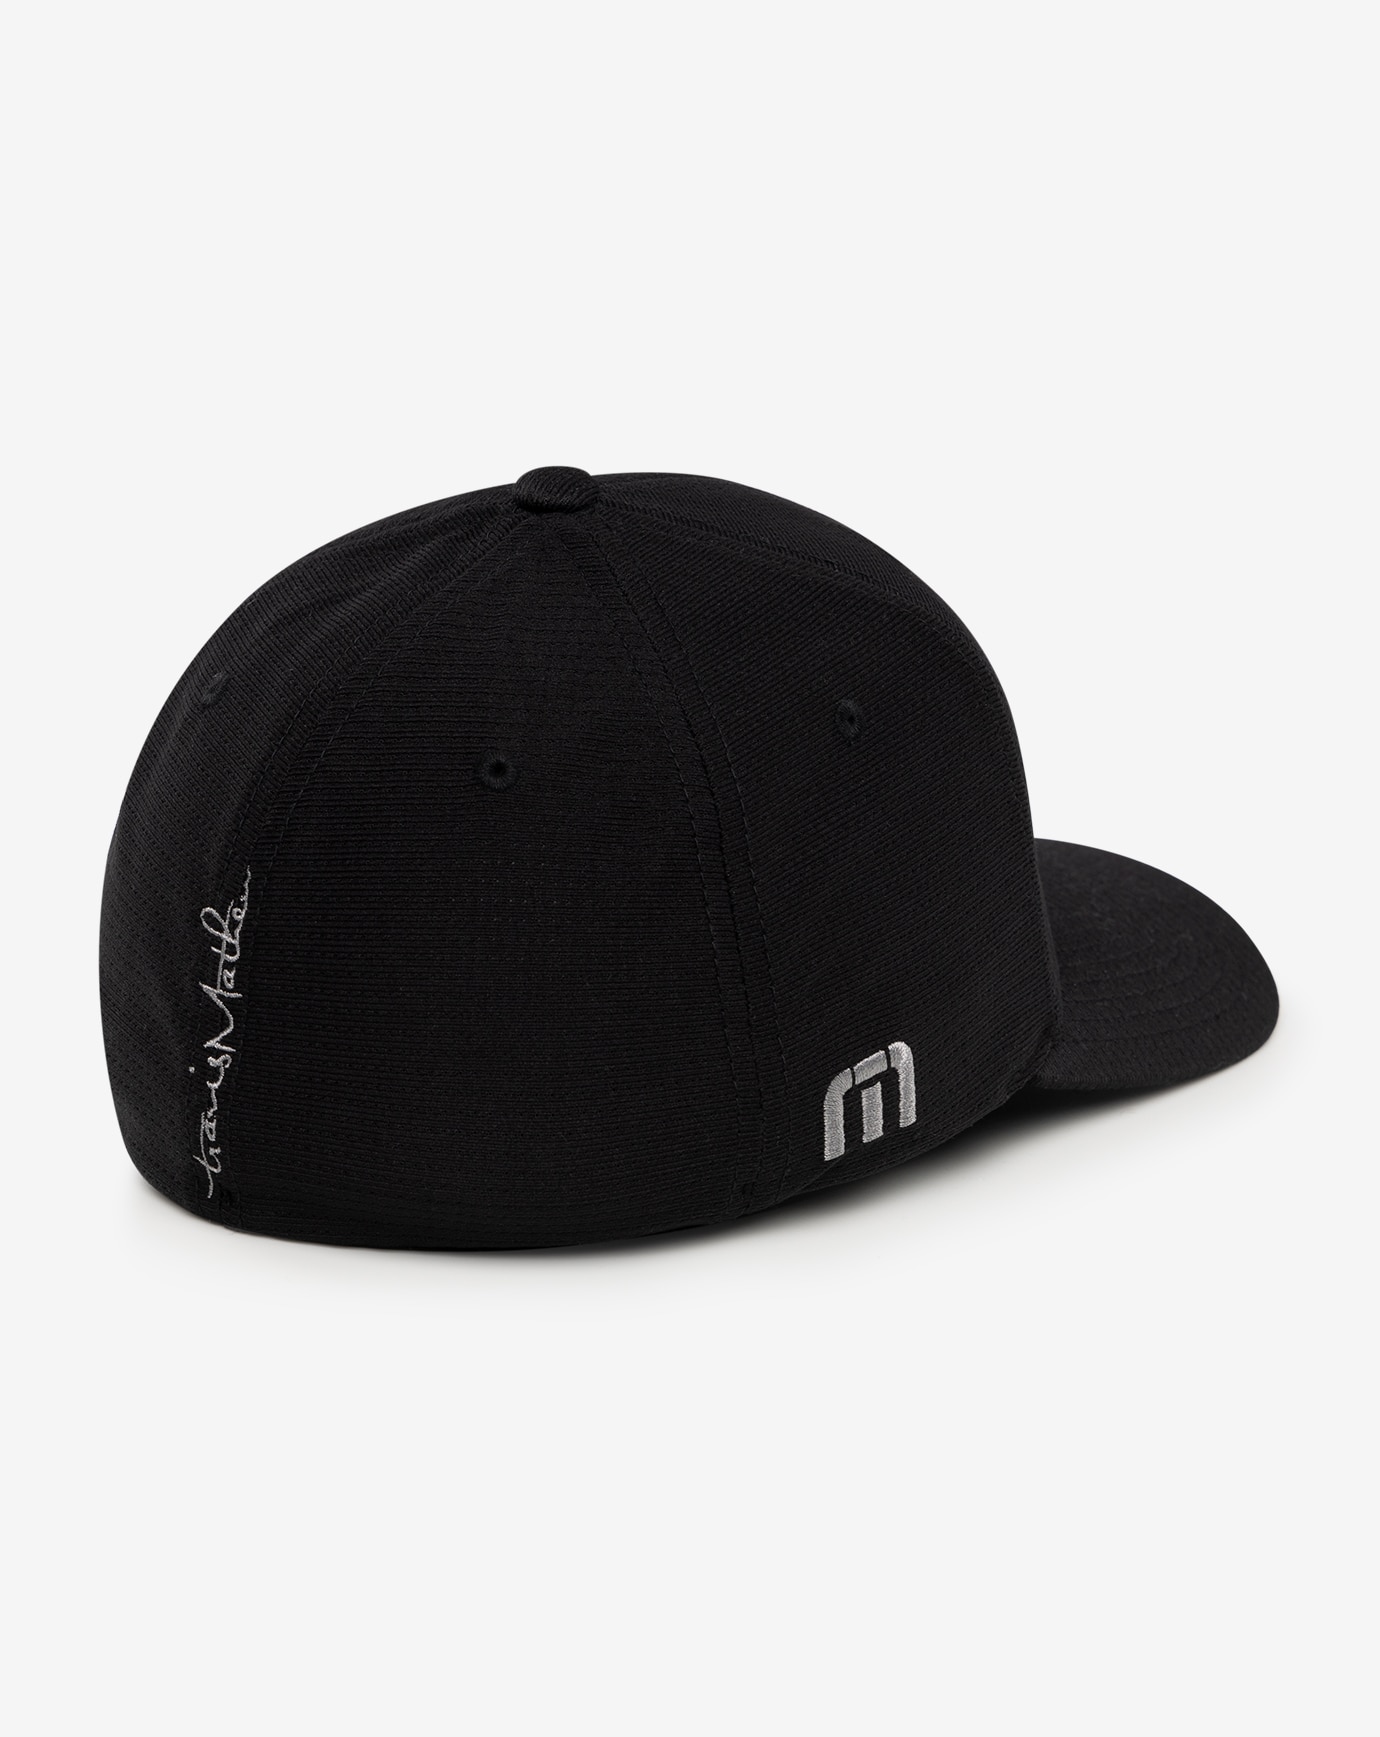 NASSAU FITTED HAT Image Thumbnail 3